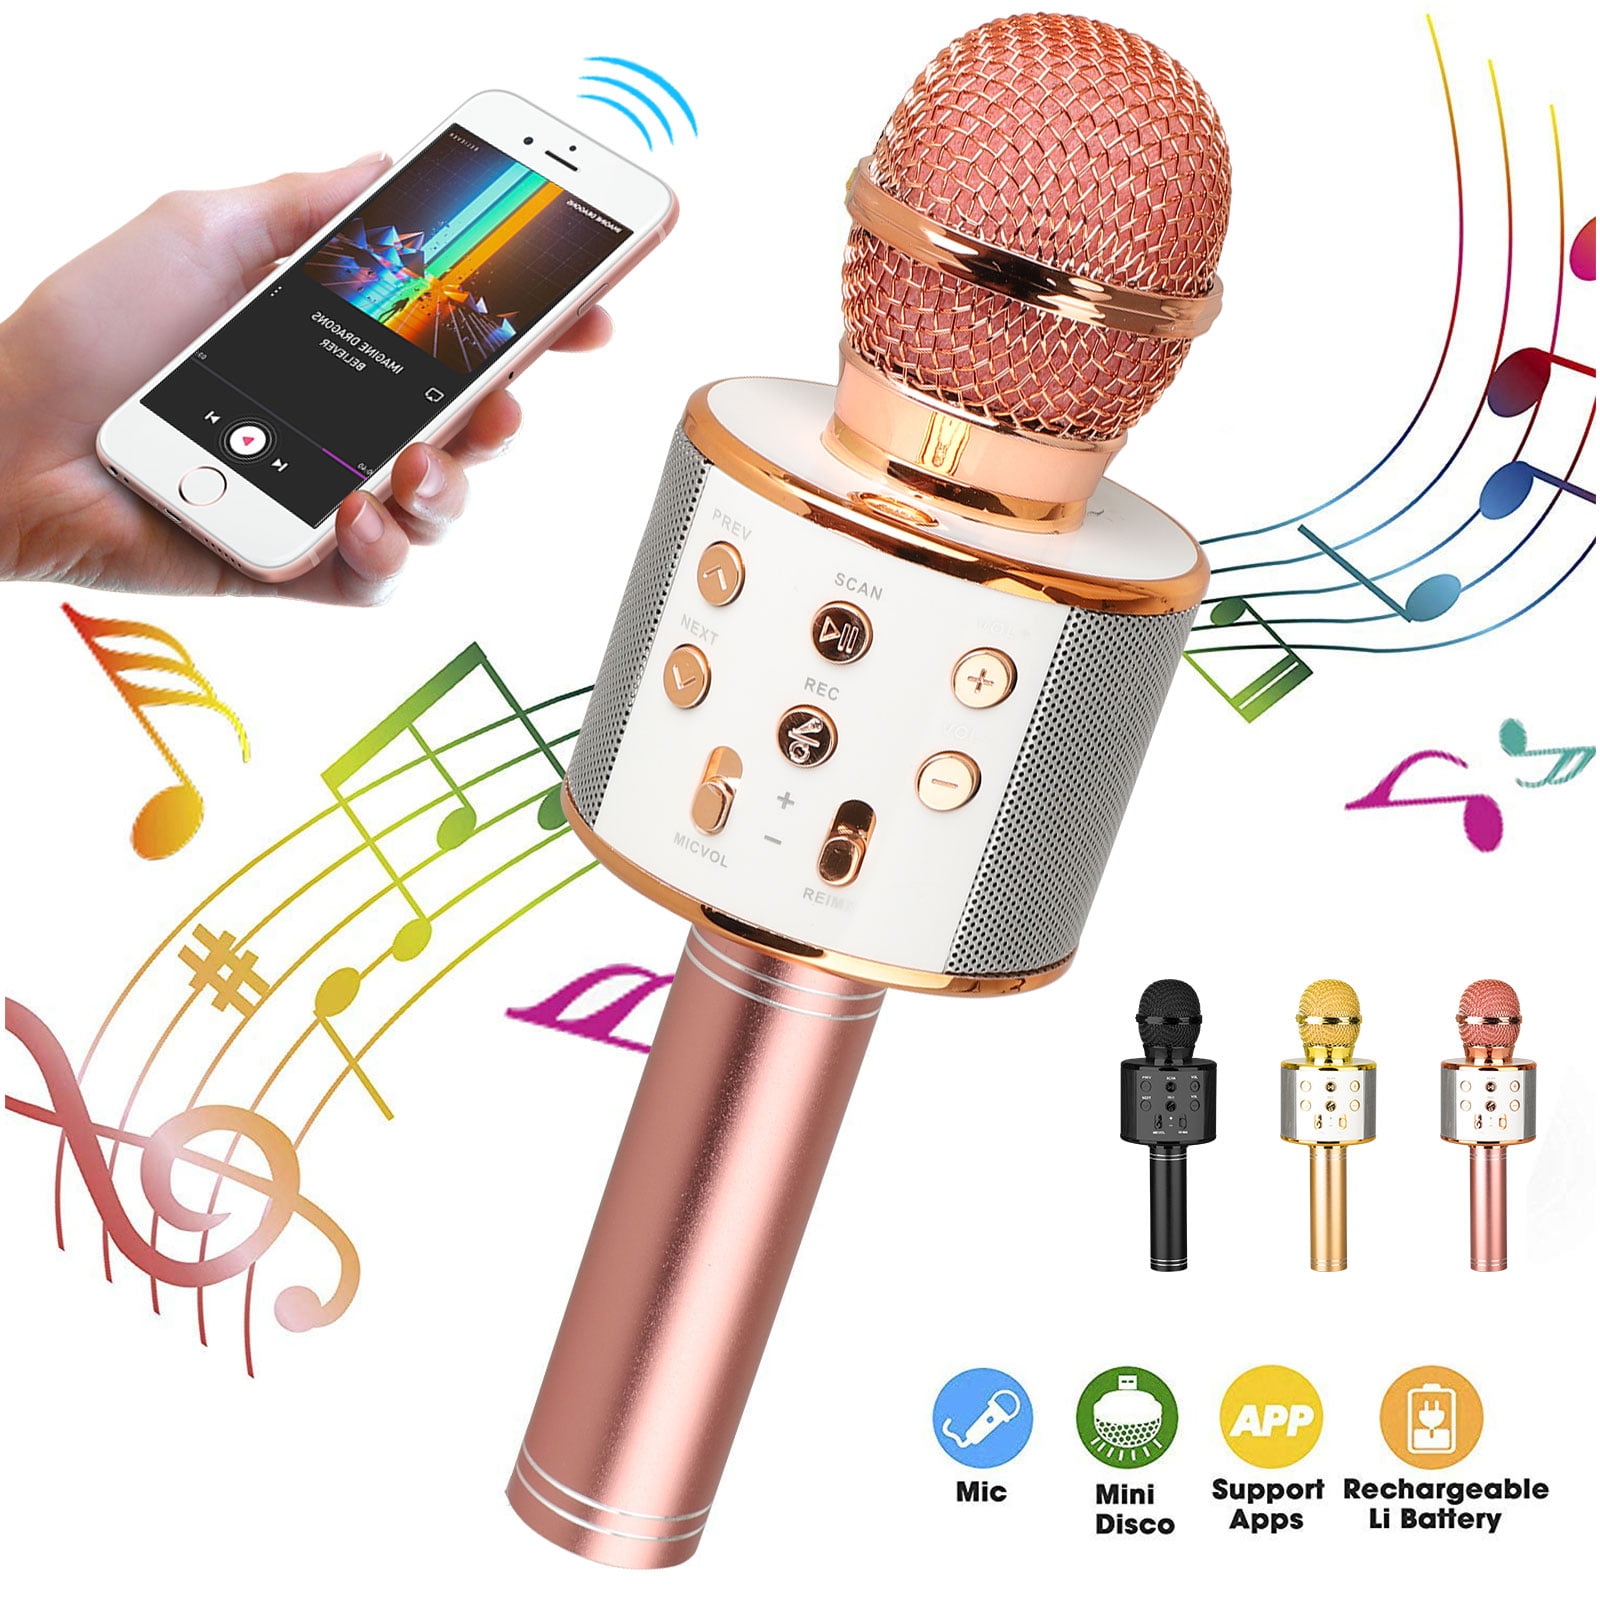 Portable Karaoke Machine Speaker Home Party Birthday for Android/iPhone/iPad/Sony/PC Rose Gold Mbuynow Wireless Bluetooth Karaoke Microphone with Phone Holder 